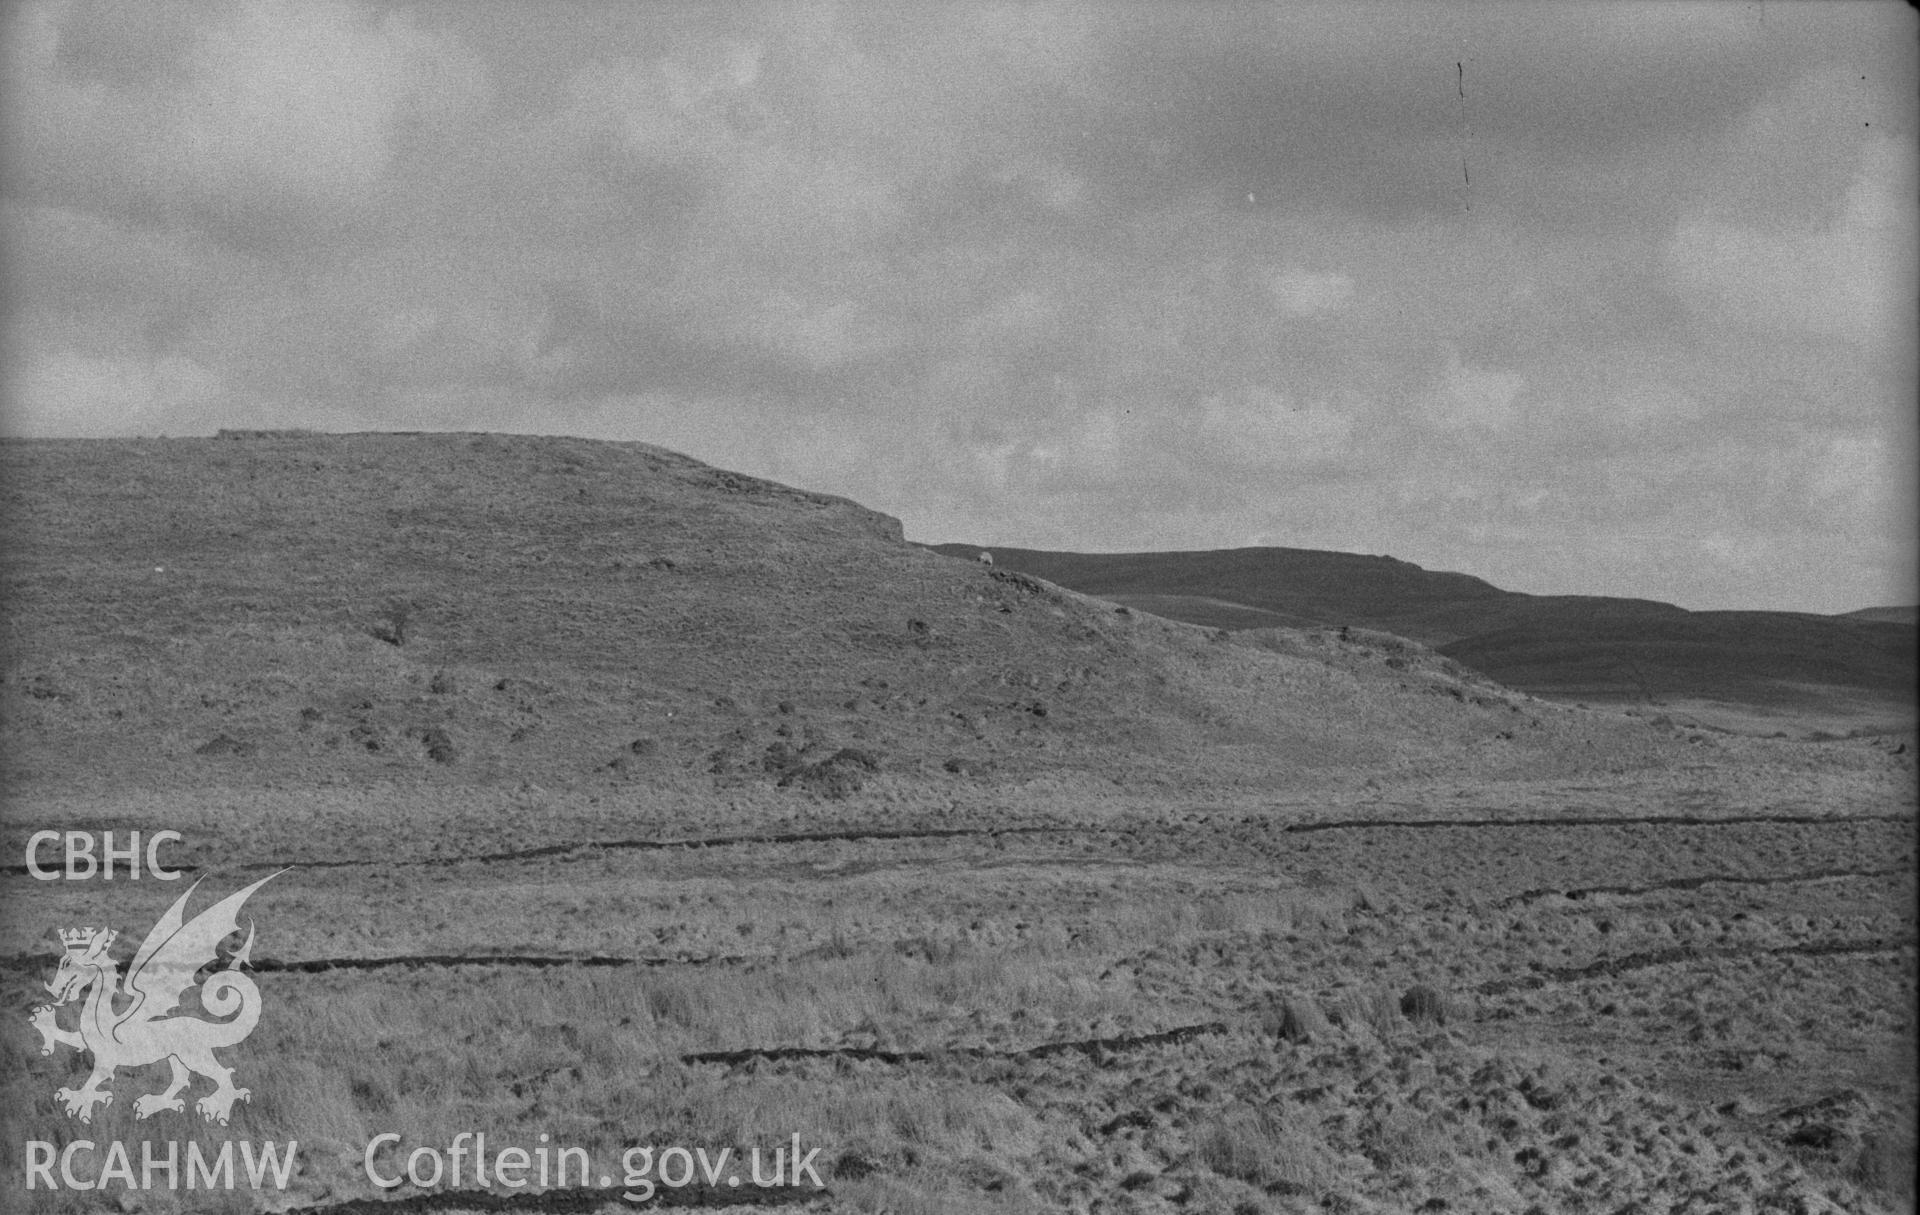 Digital copy of a black and white negative showing view of Pen Dinas, Elerch, with entrance on right. Photographed in April 1963 by Arthur O. Chater from Grid Reference SN 6764 8767, looking east. Panorama 3 of 3 photographs.